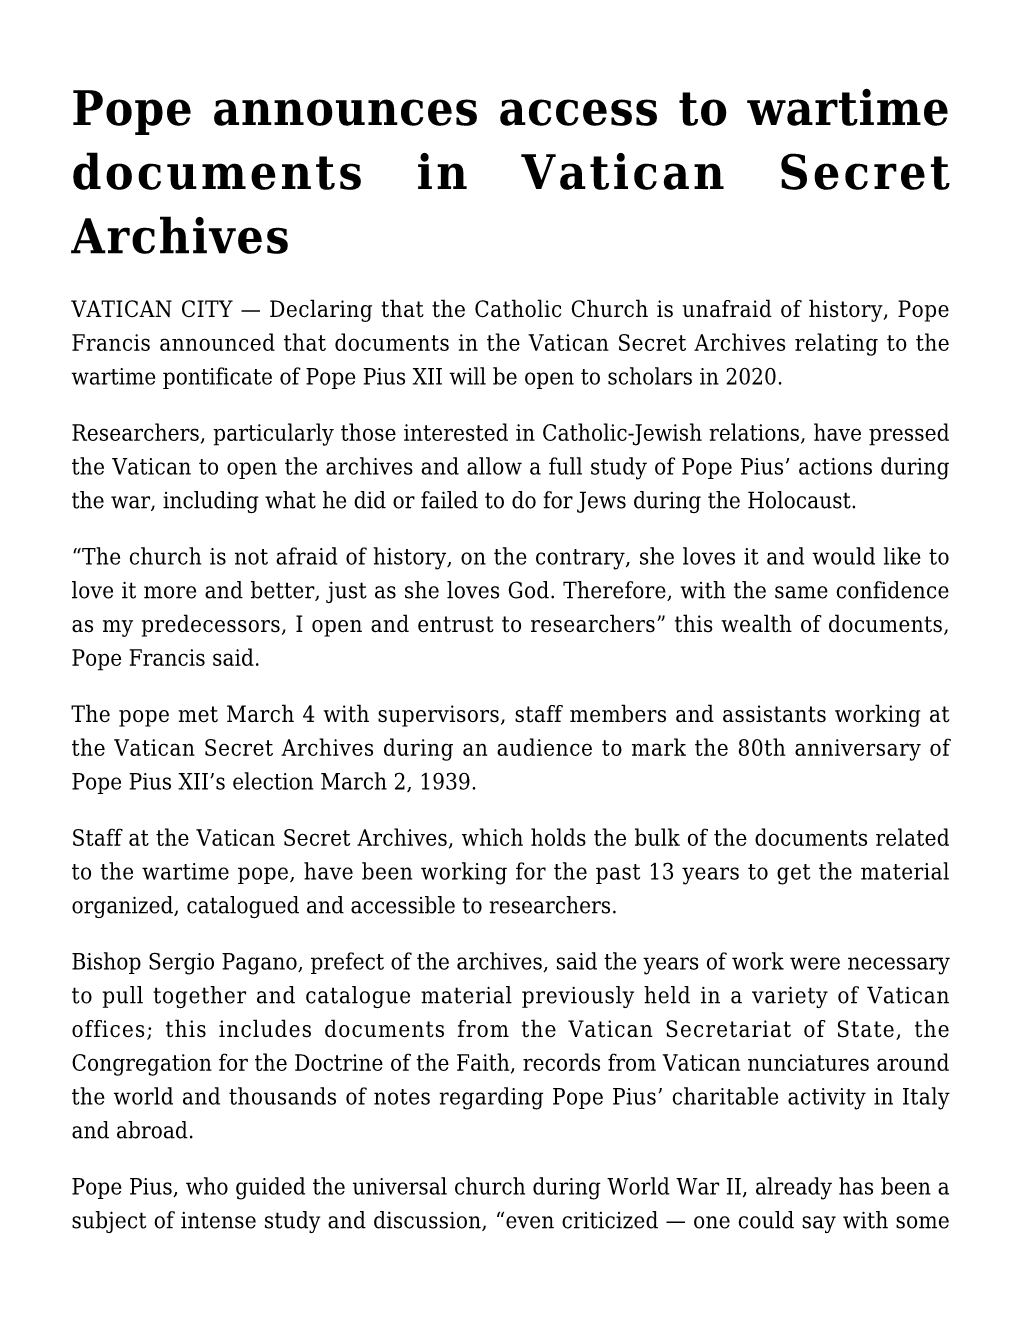 Pope Announces Access to Wartime Documents in Vatican Secret Archives